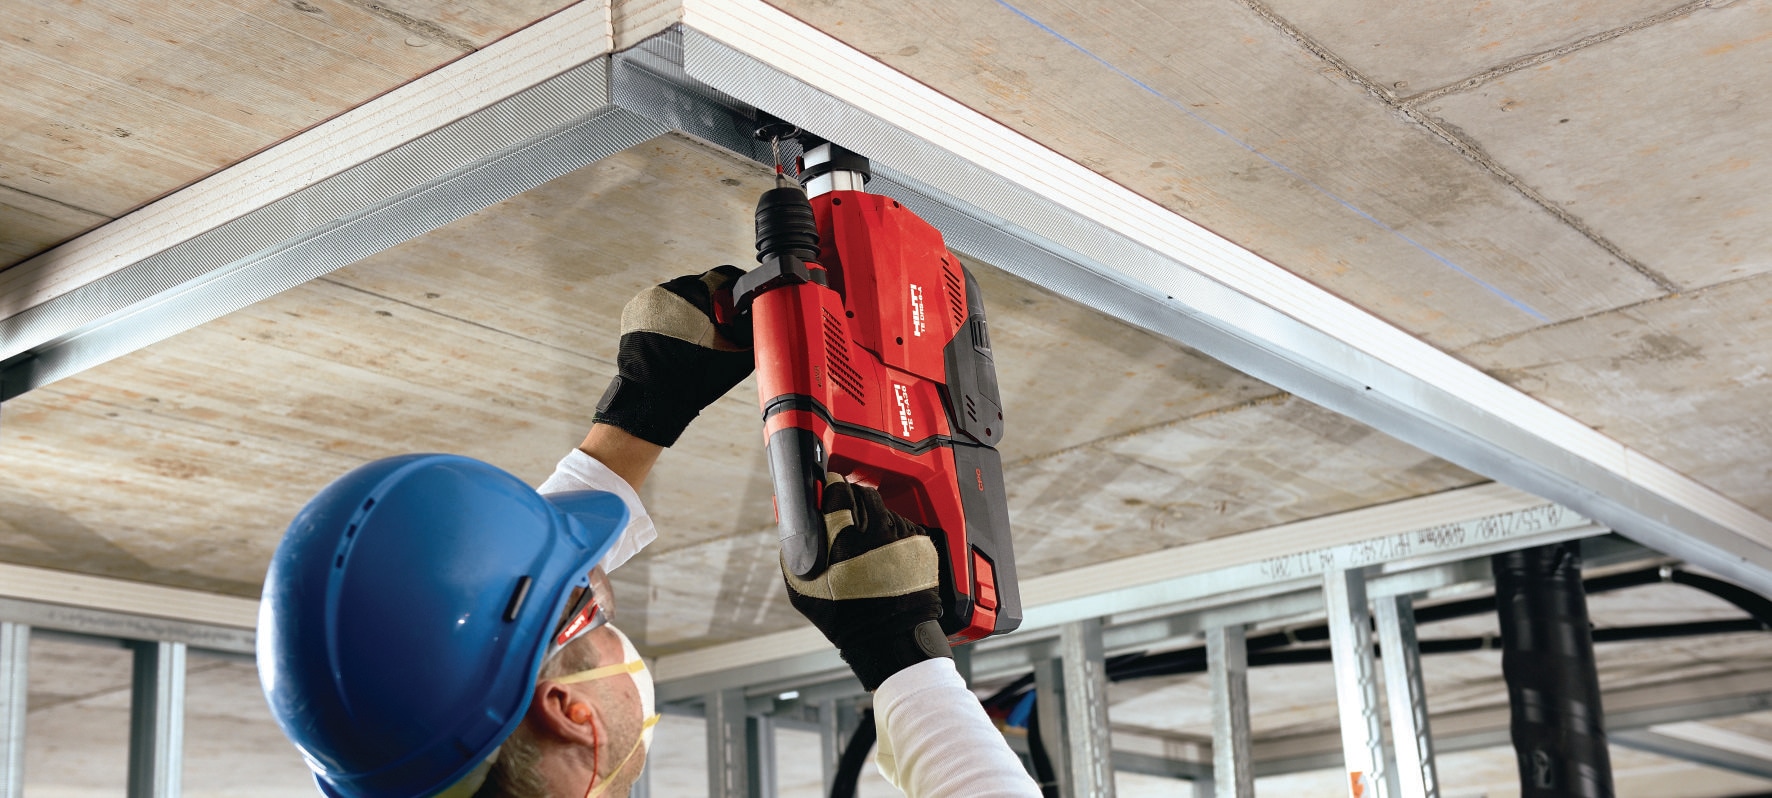 TE 6-A36 Cordless rotary hammer Cordless SDS Plus Rotary Hammers Hilti  USA